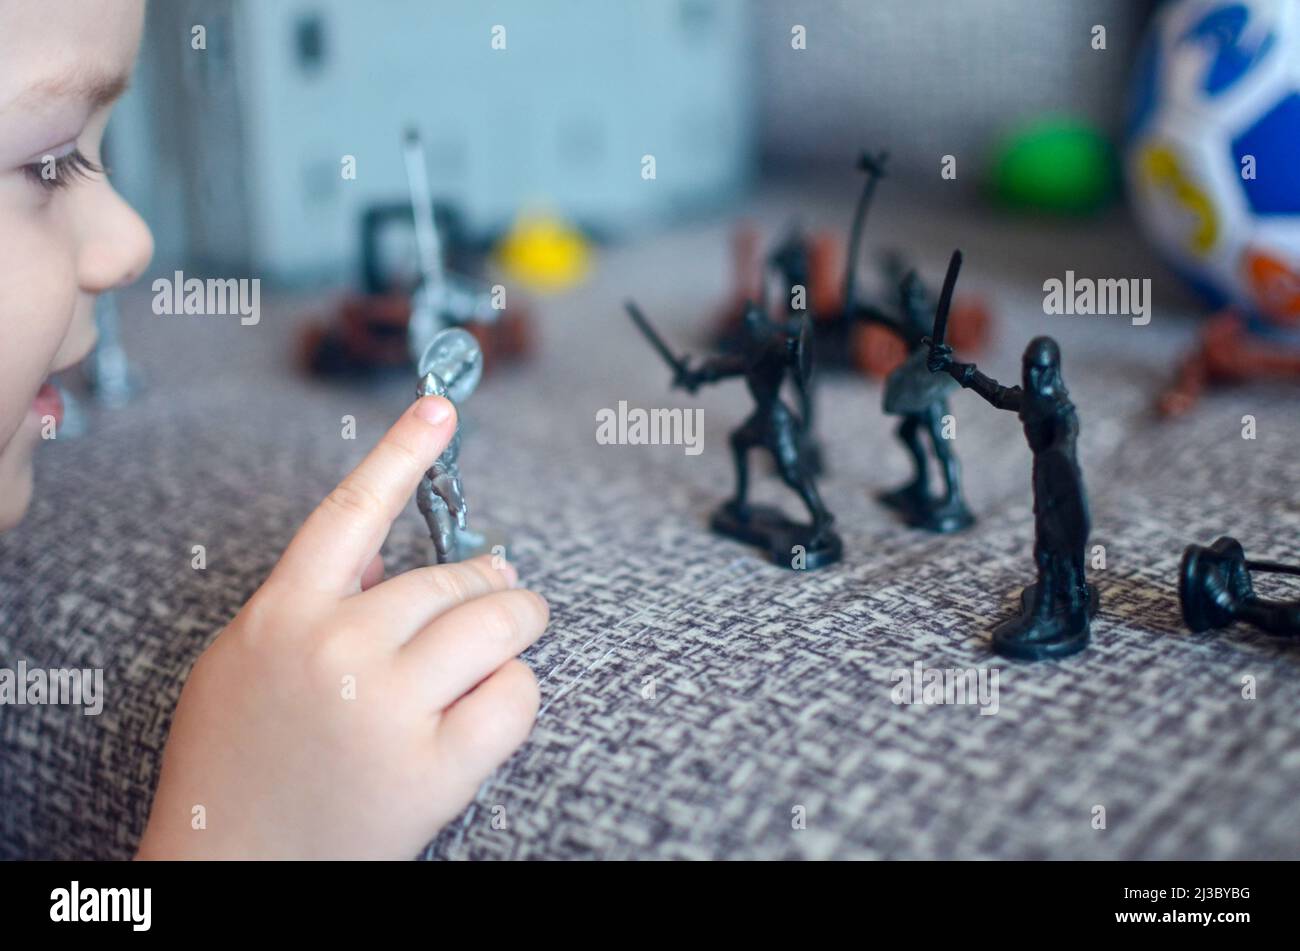 home games for preschoolers concept - caucasian boy's hands and face play toy soldiers on sofa Stock Photo